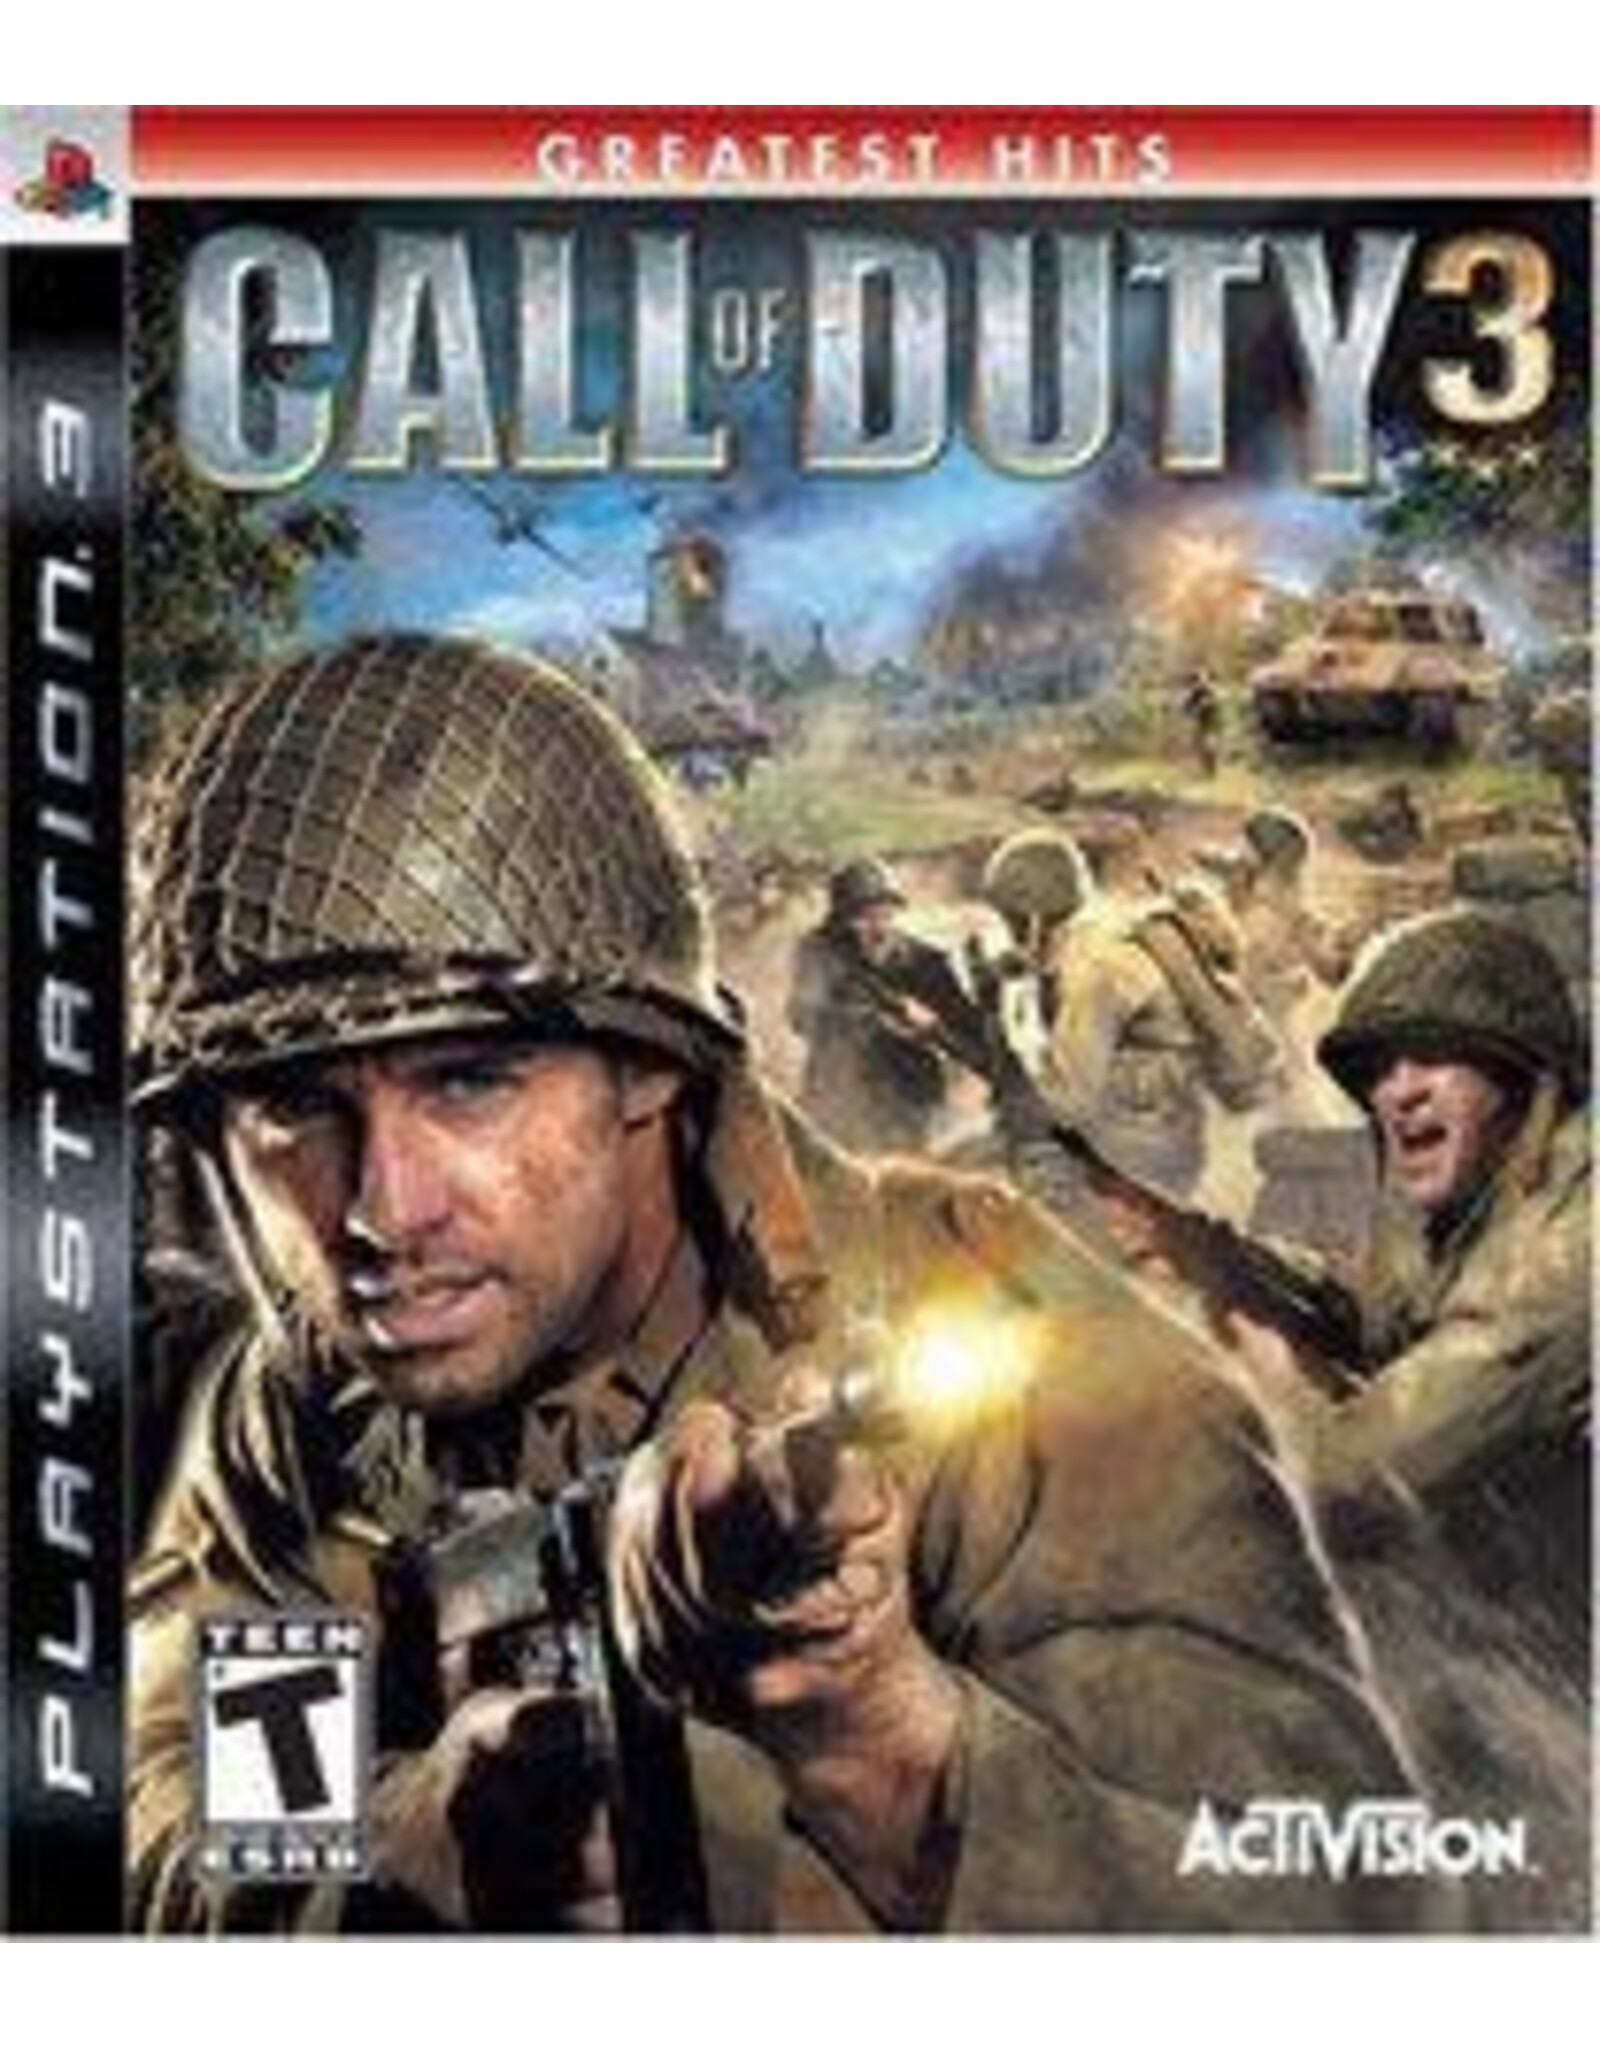 Playstation 3 Call of Duty 3 - Greatest Hits (Used)